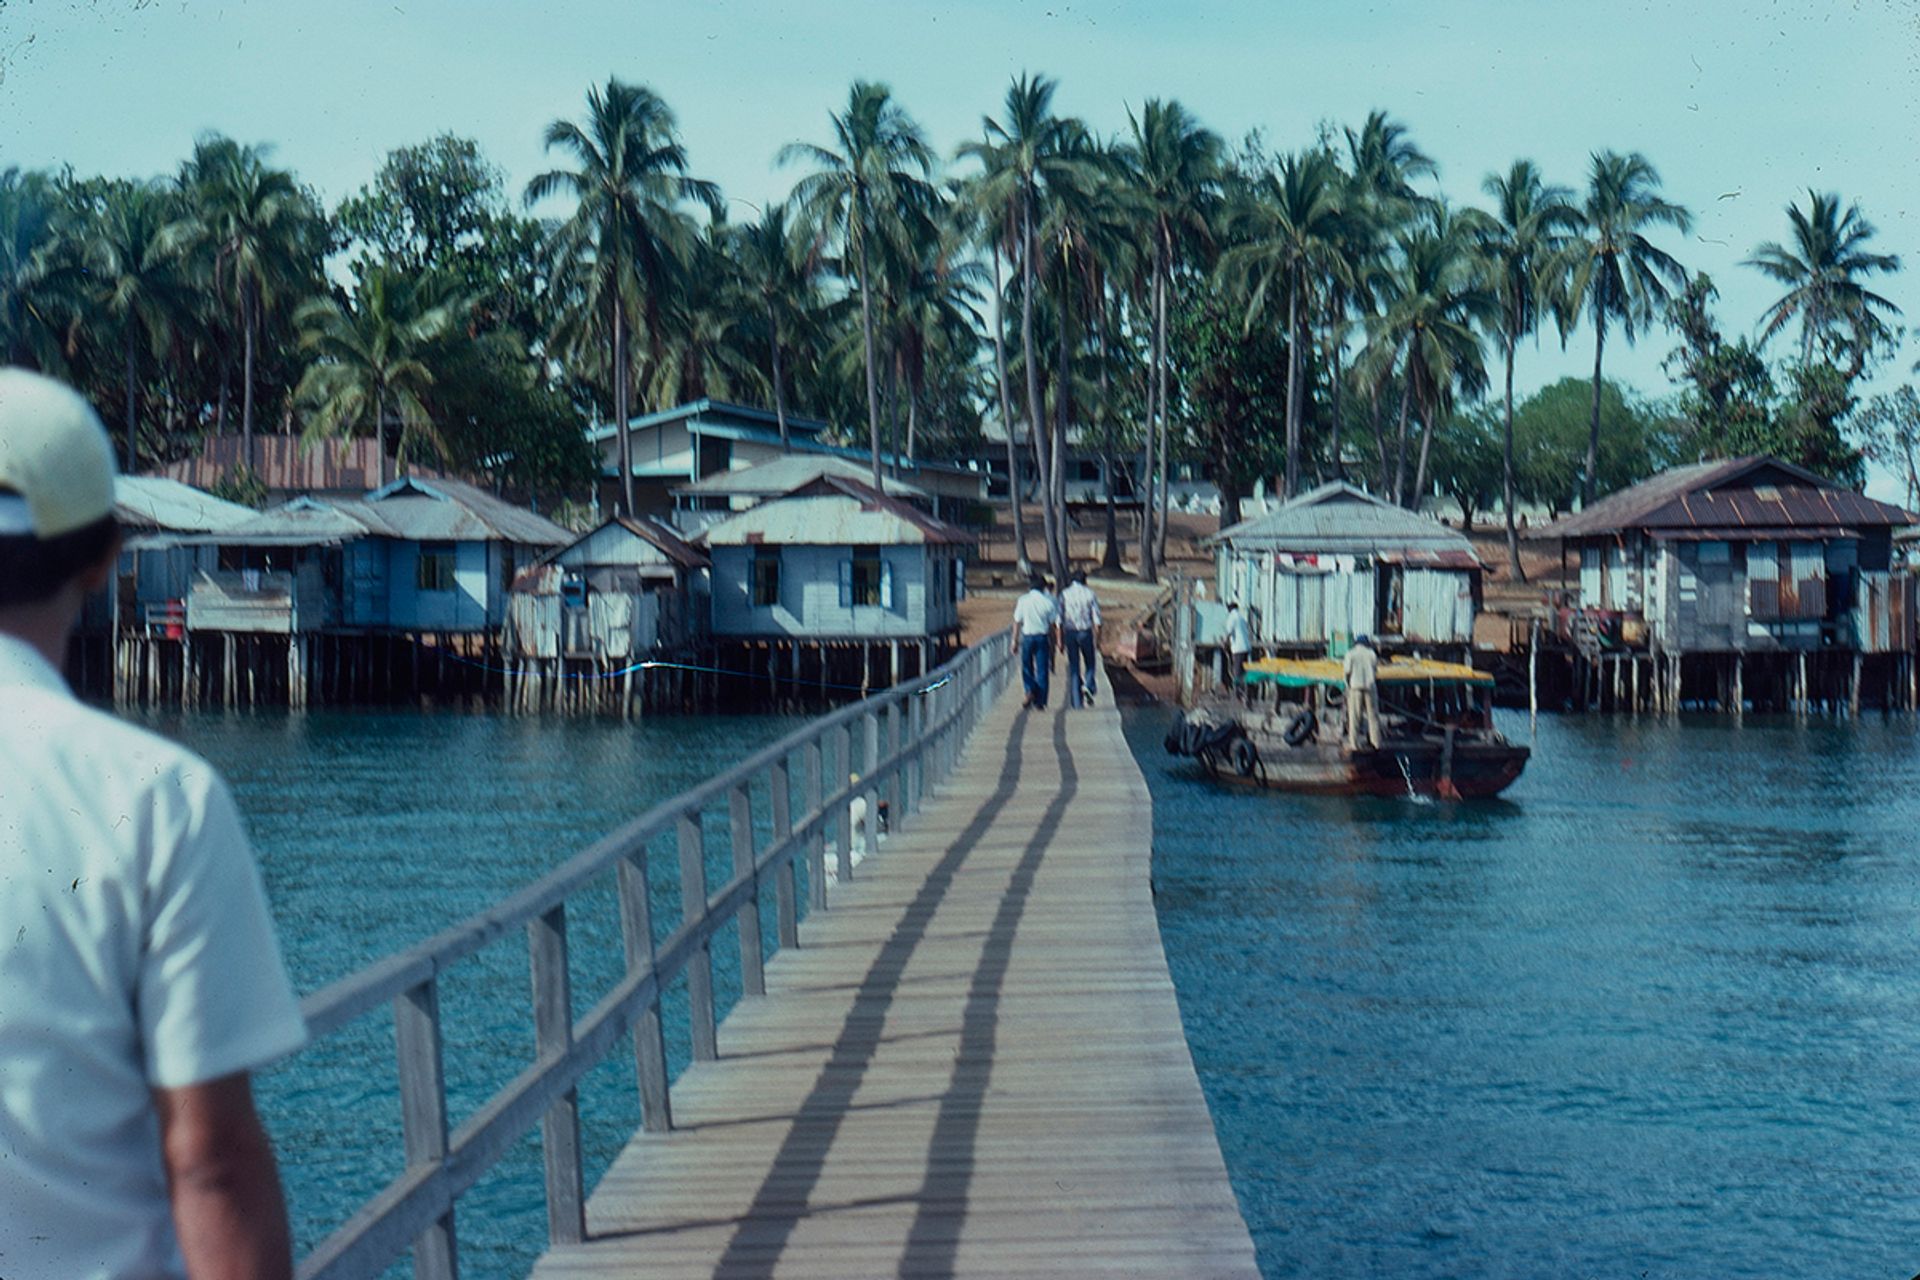 Pulau Seraya, with houses built on piles between tidemarks in the late 1960s. This island is now part of Jurong Island, dedicated to the petrochemical industry.